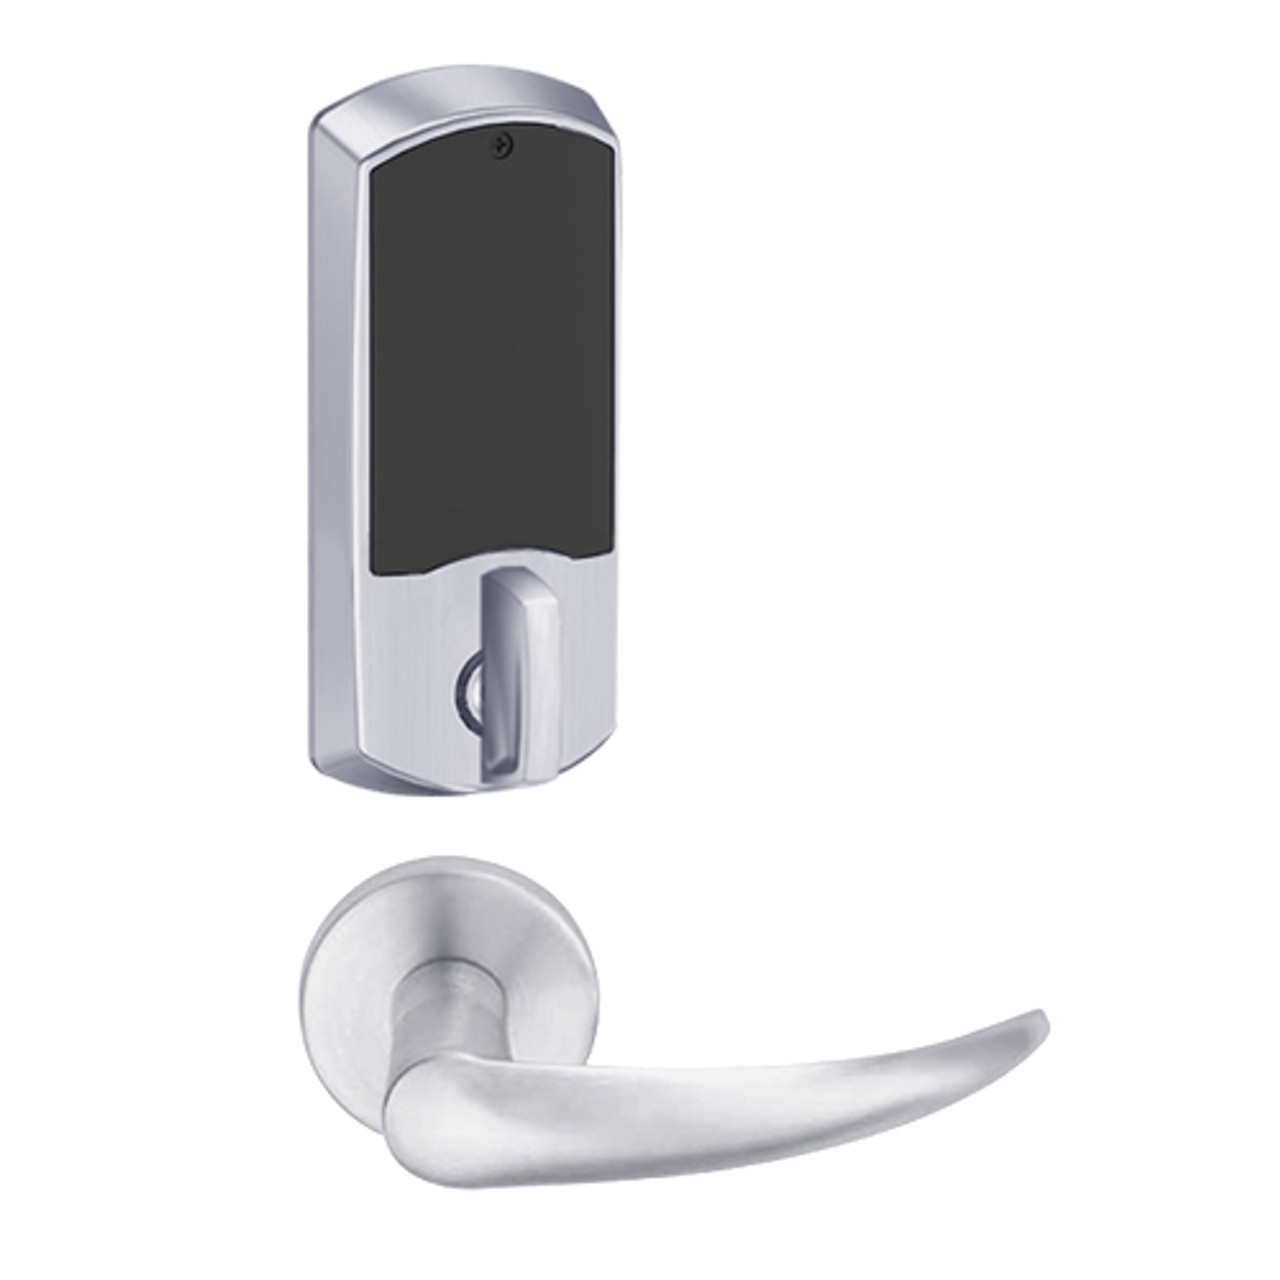 LEMD-GRW-J-OME-626-00B Schlage Privacy/Apartment Wireless Greenwich Mortise Deadbolt Lock with LED and Omega Lever Prepped for FSIC in Satin Chrome